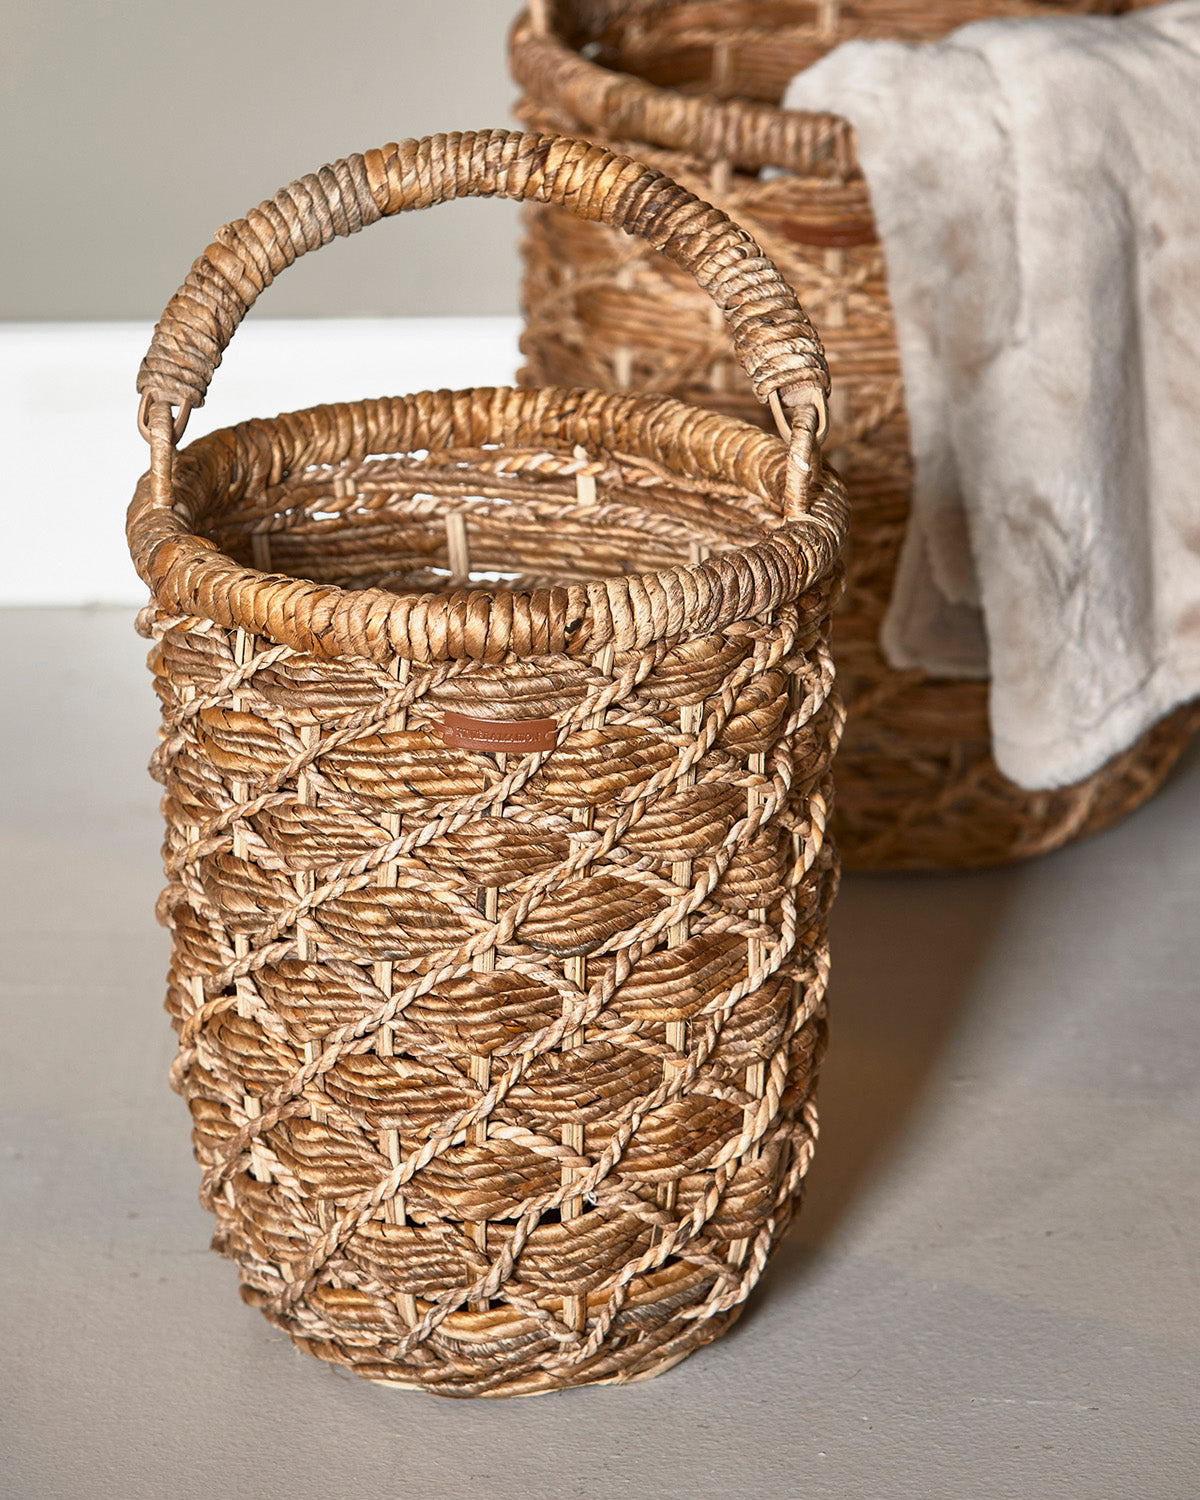  Basket from banana leaf by Riviera Maison